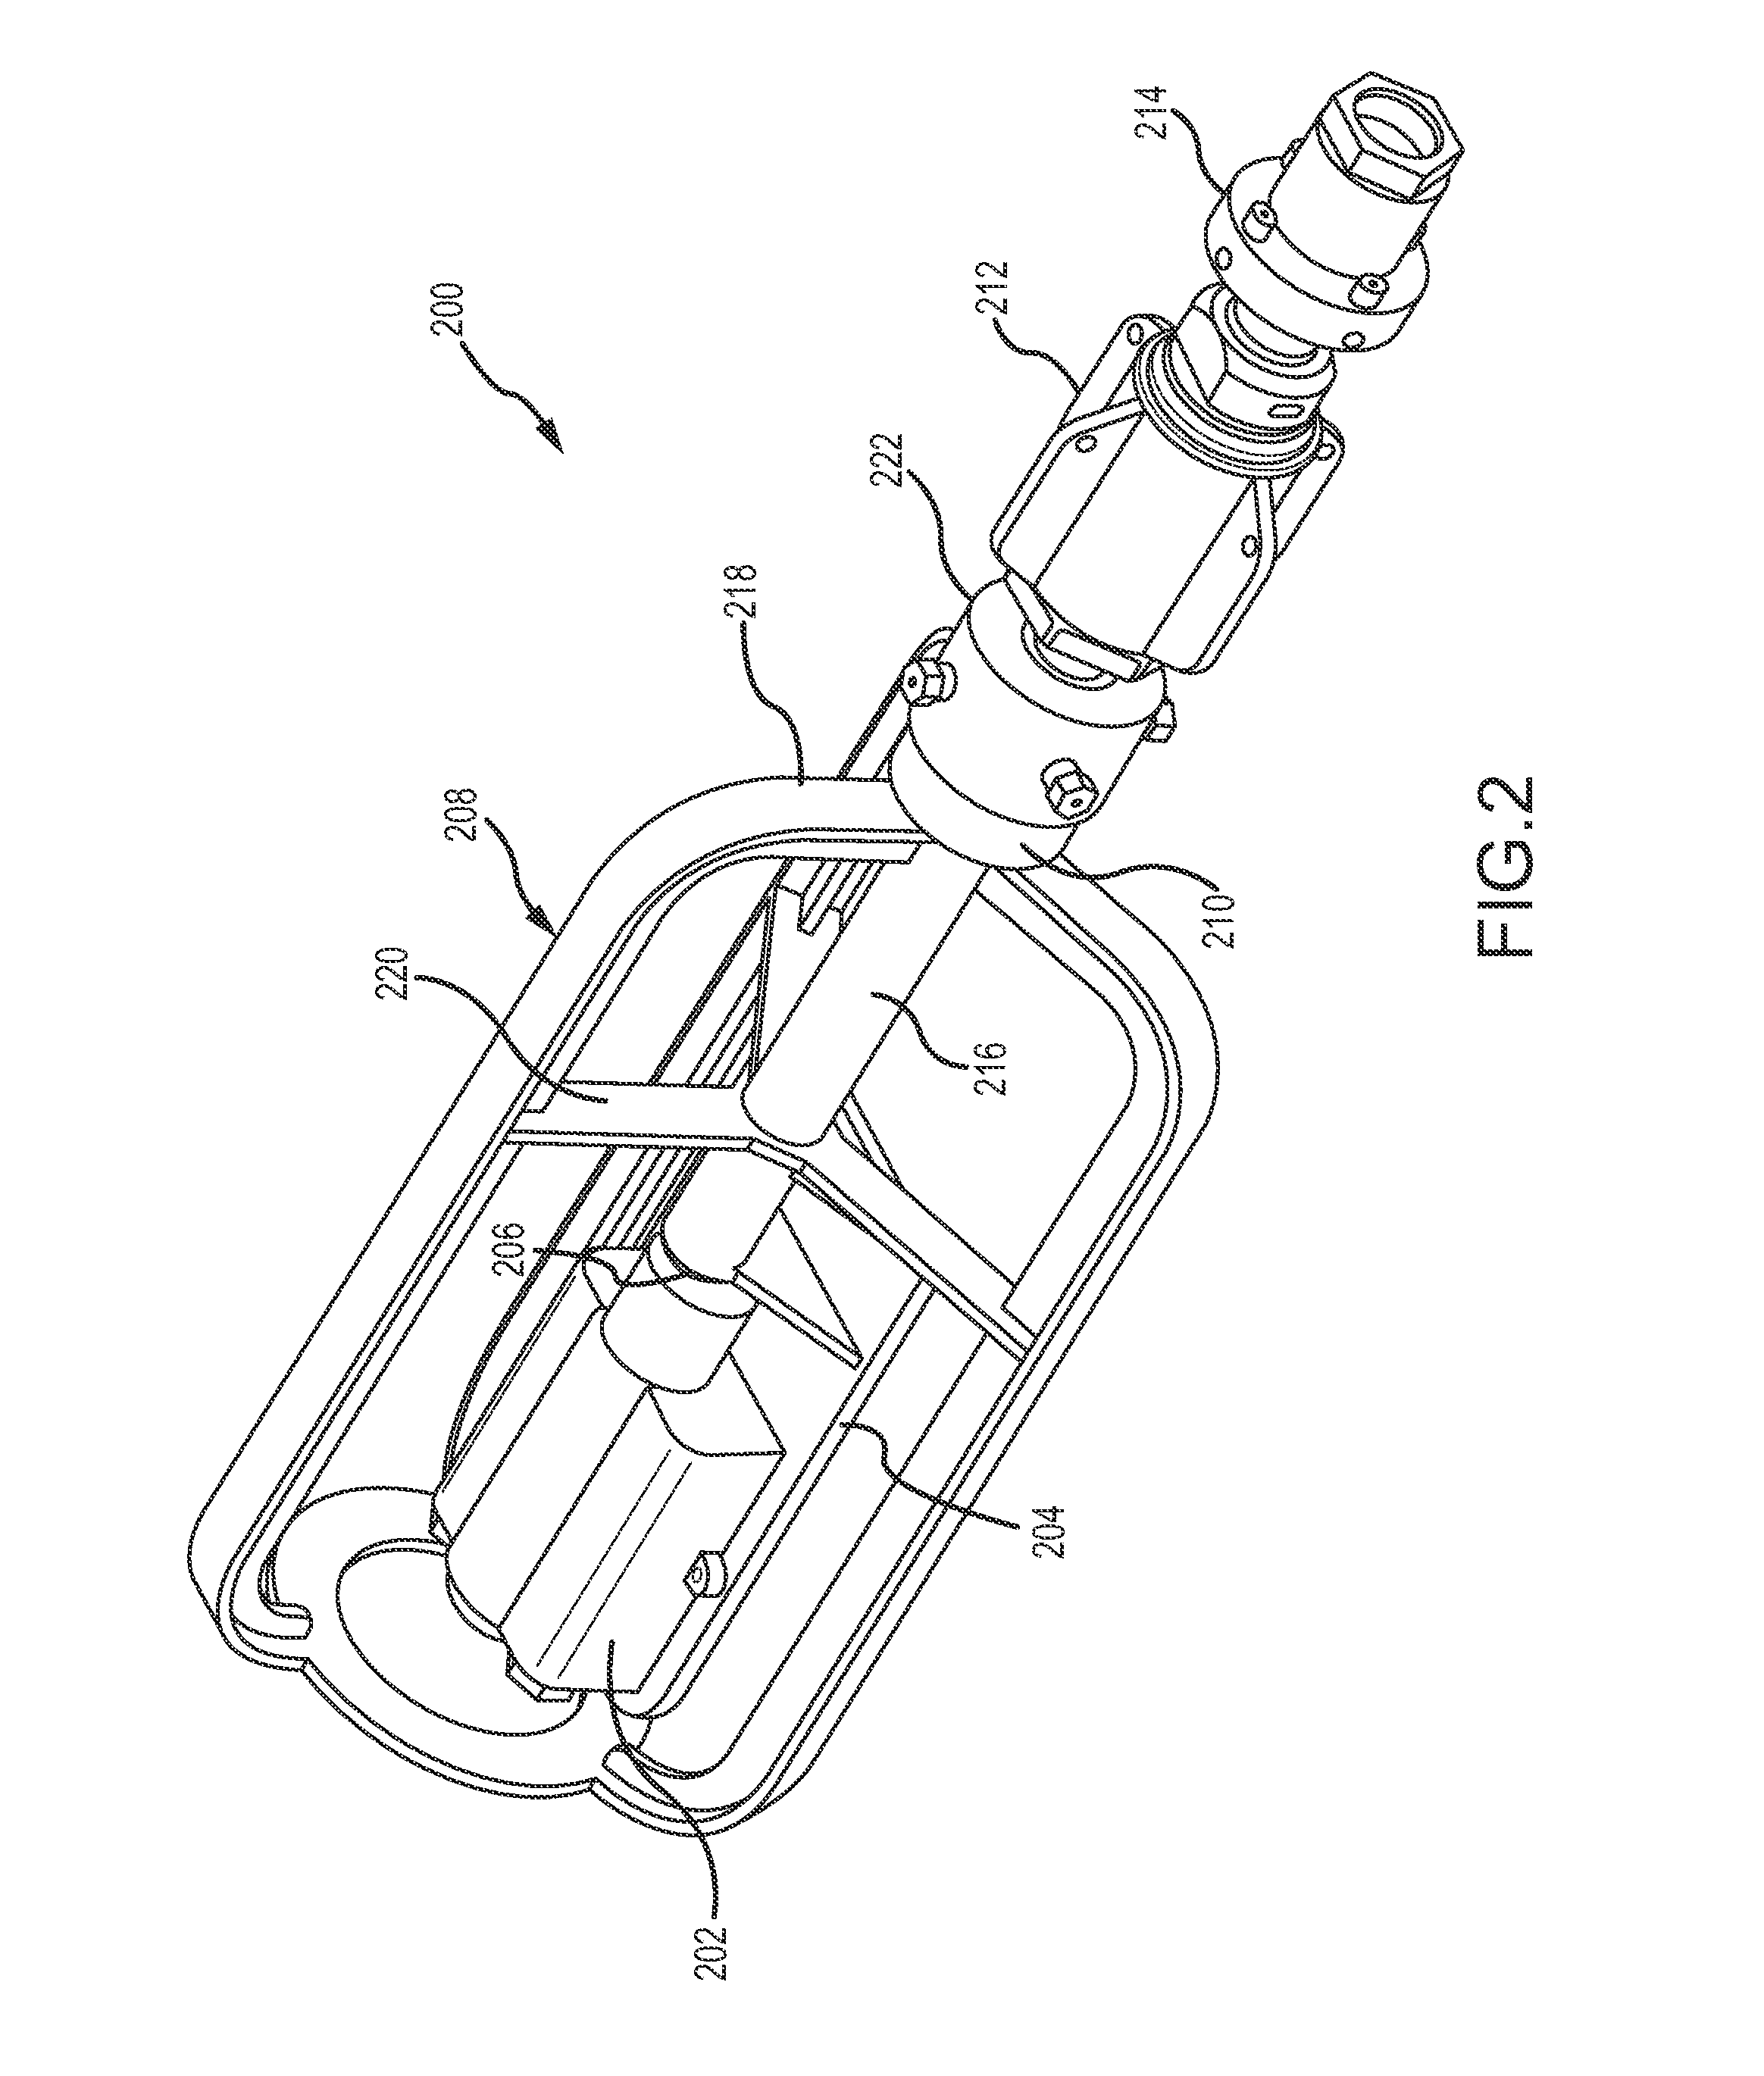 Camera skid tractor nozzle assembly